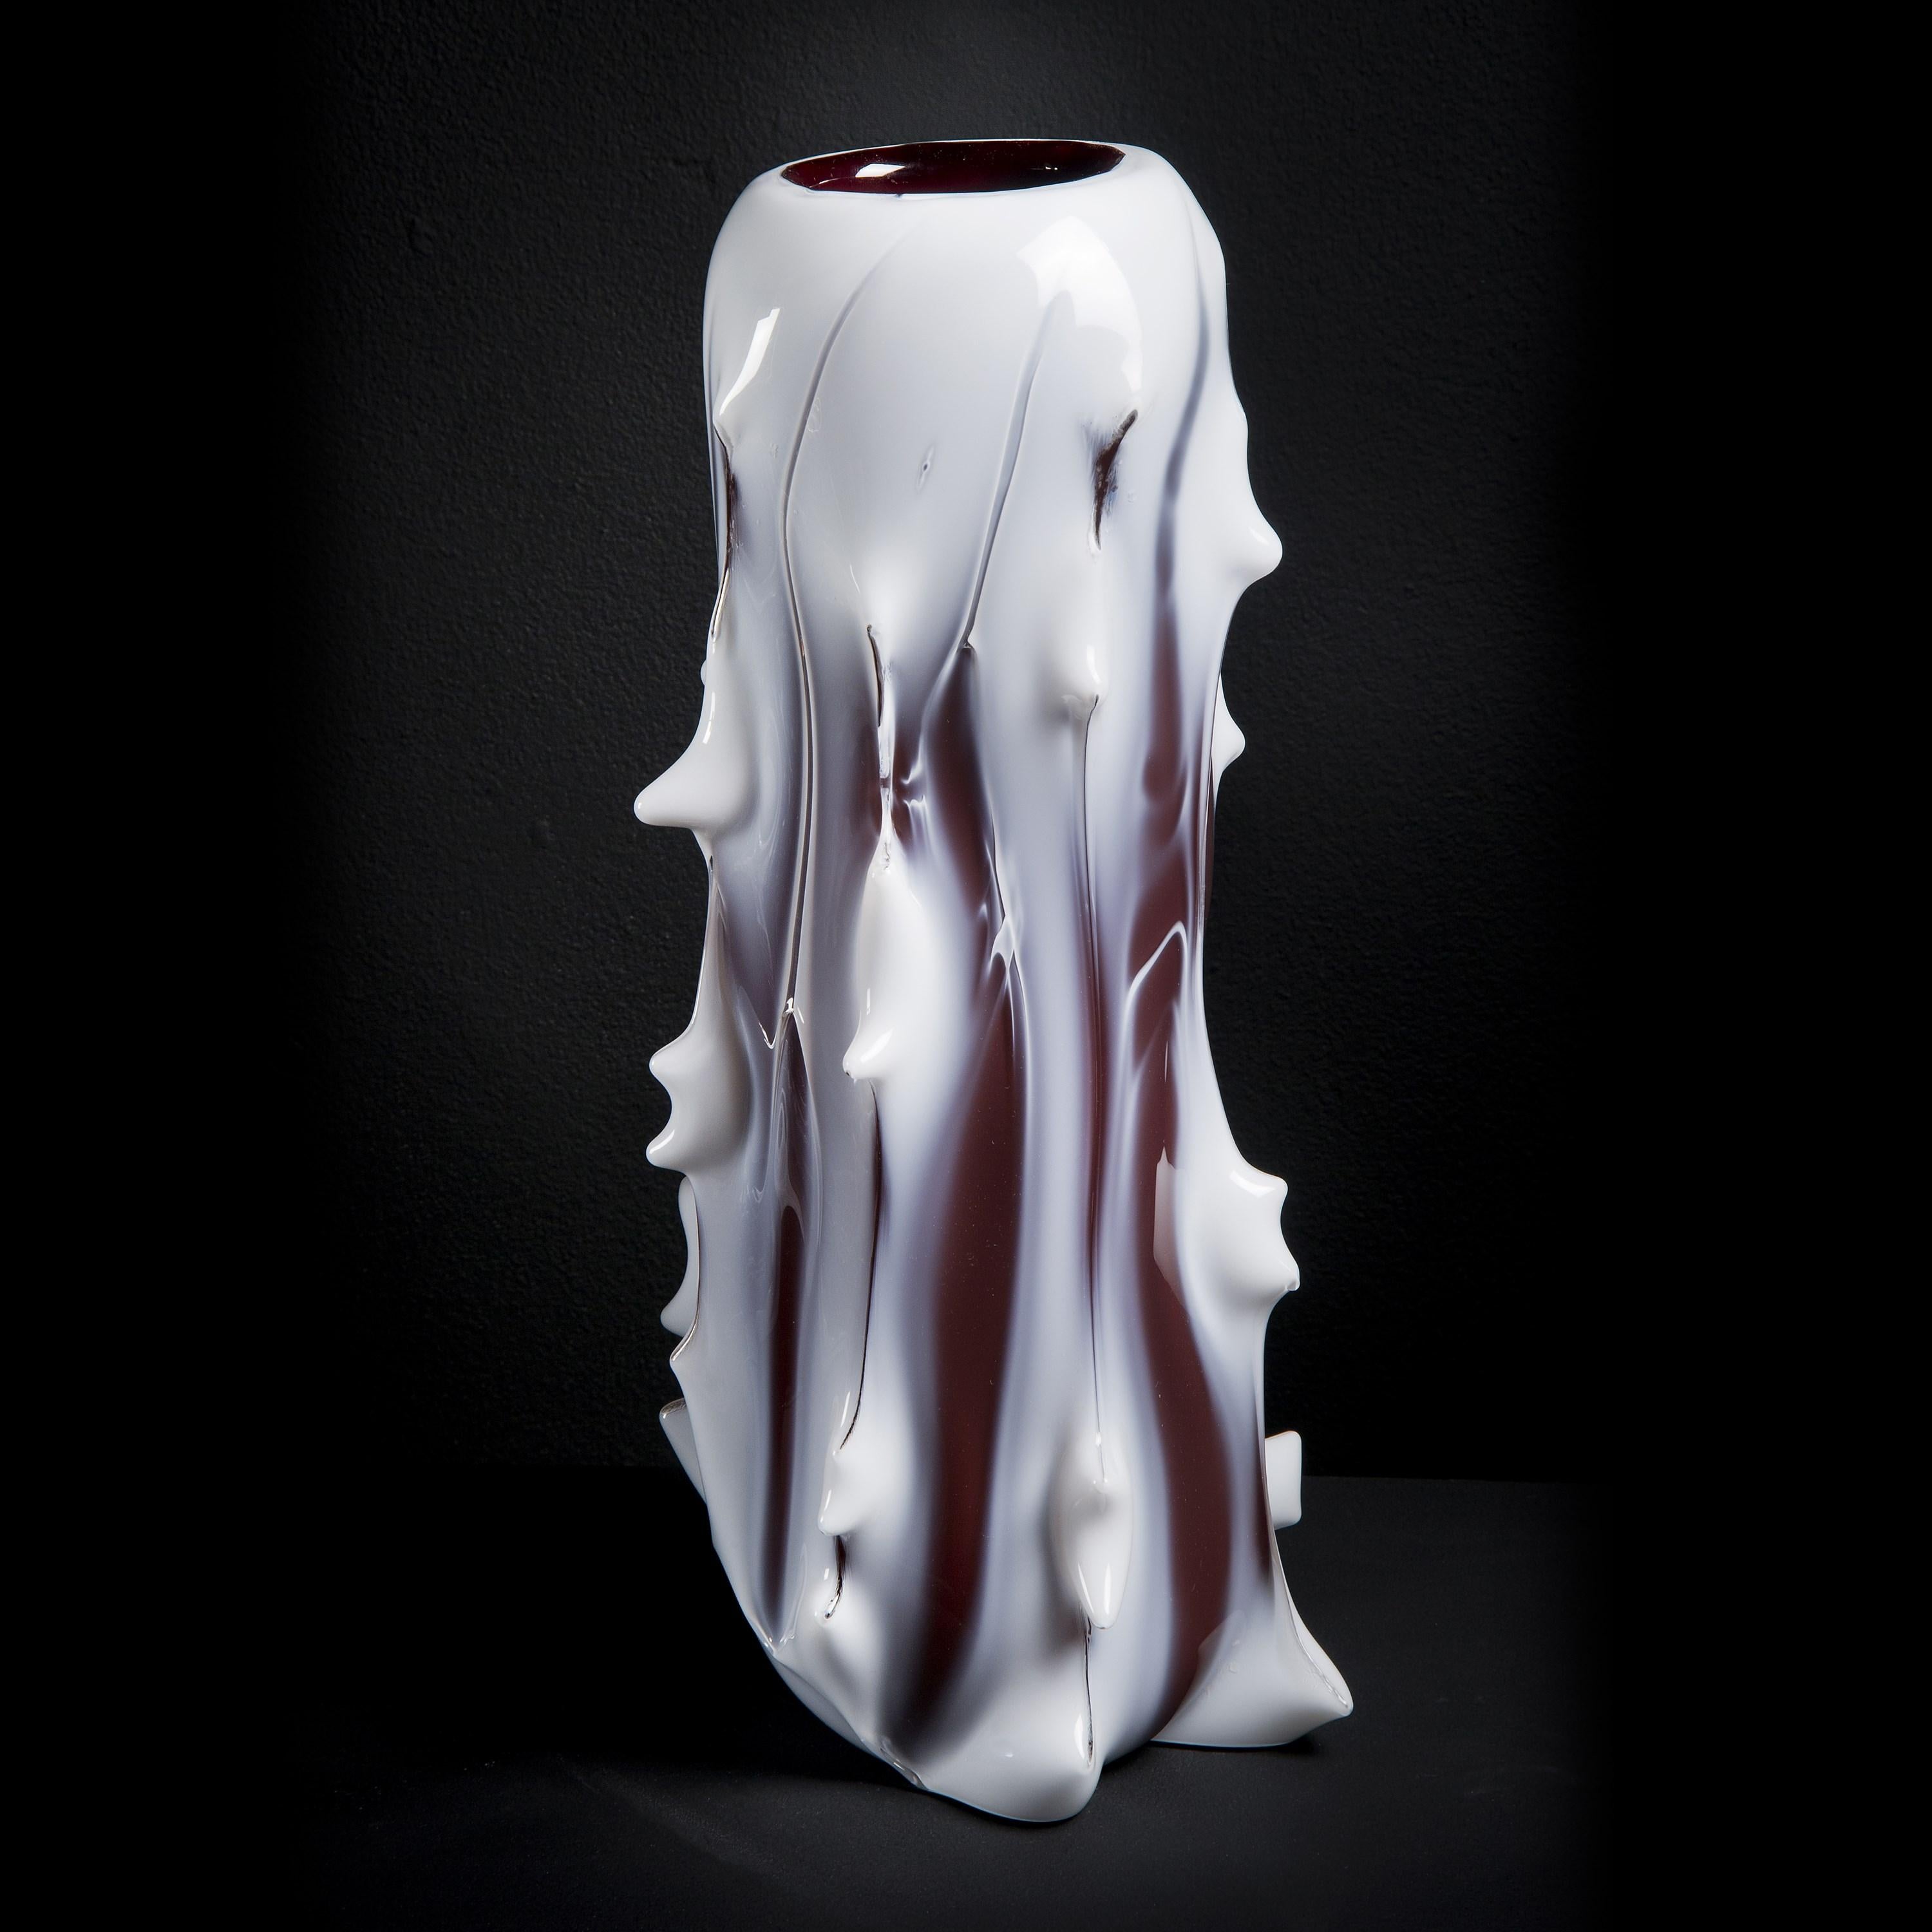 ‘Spinal I' is a limited edition (ed 49) tree-inspired white & aubergine glass vase by the Swedish artist, Mårten Medbo.

Among his work, there are numerous examples of pieces having a resemblance to anthropomorphic or biomorphic structures, without